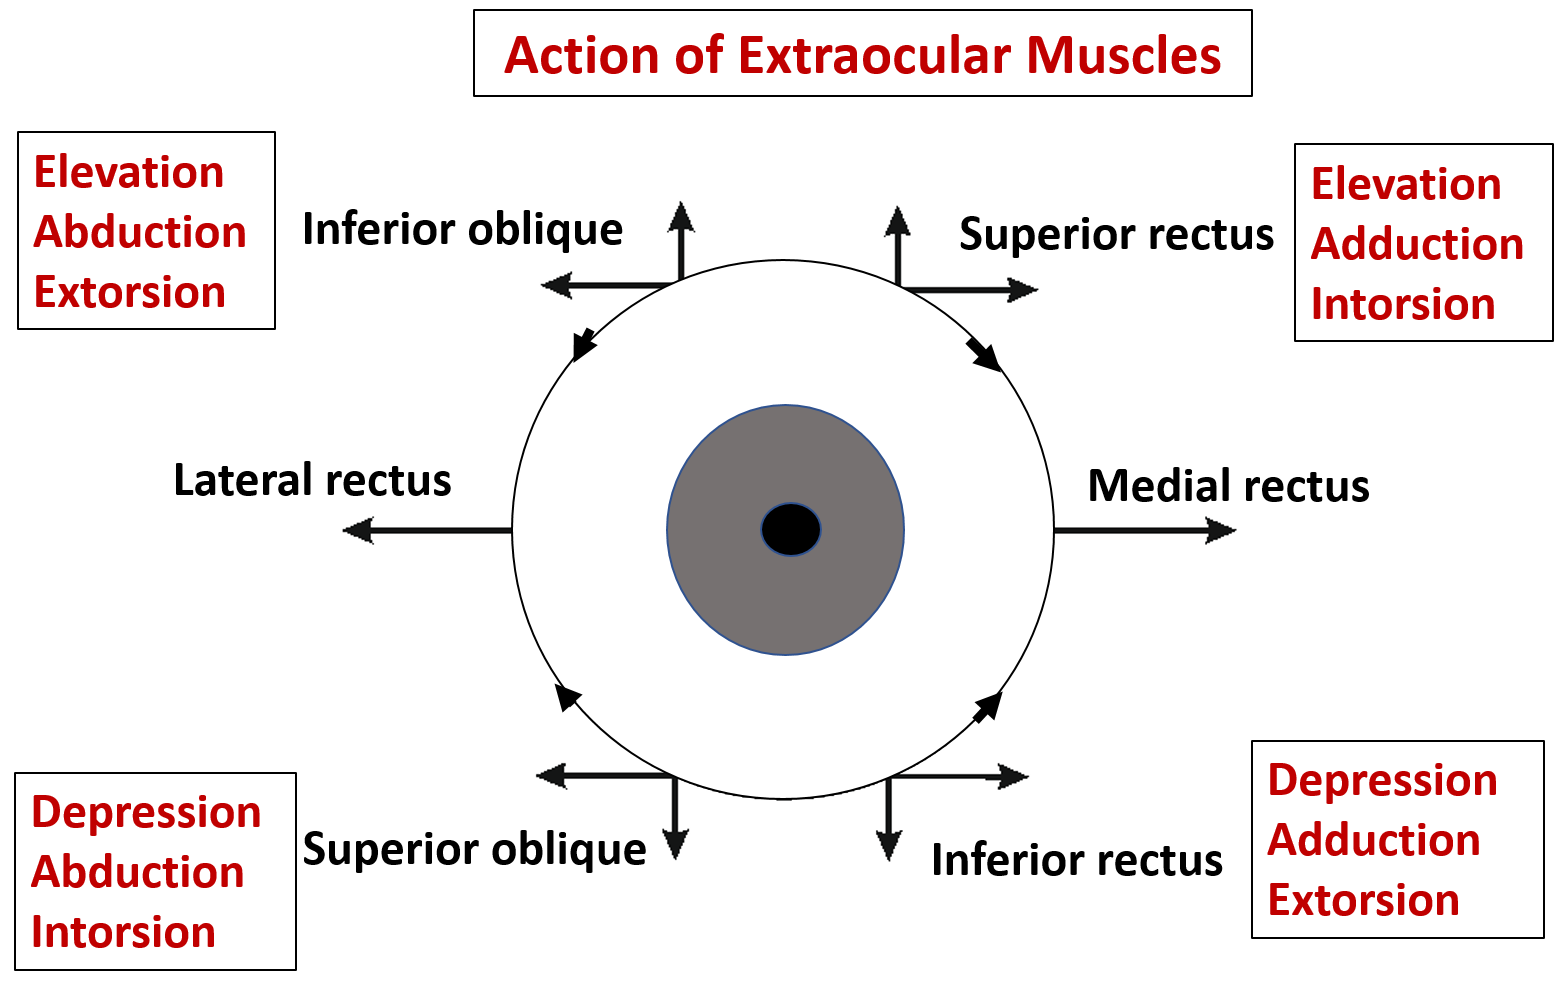 extraocular muscles - action